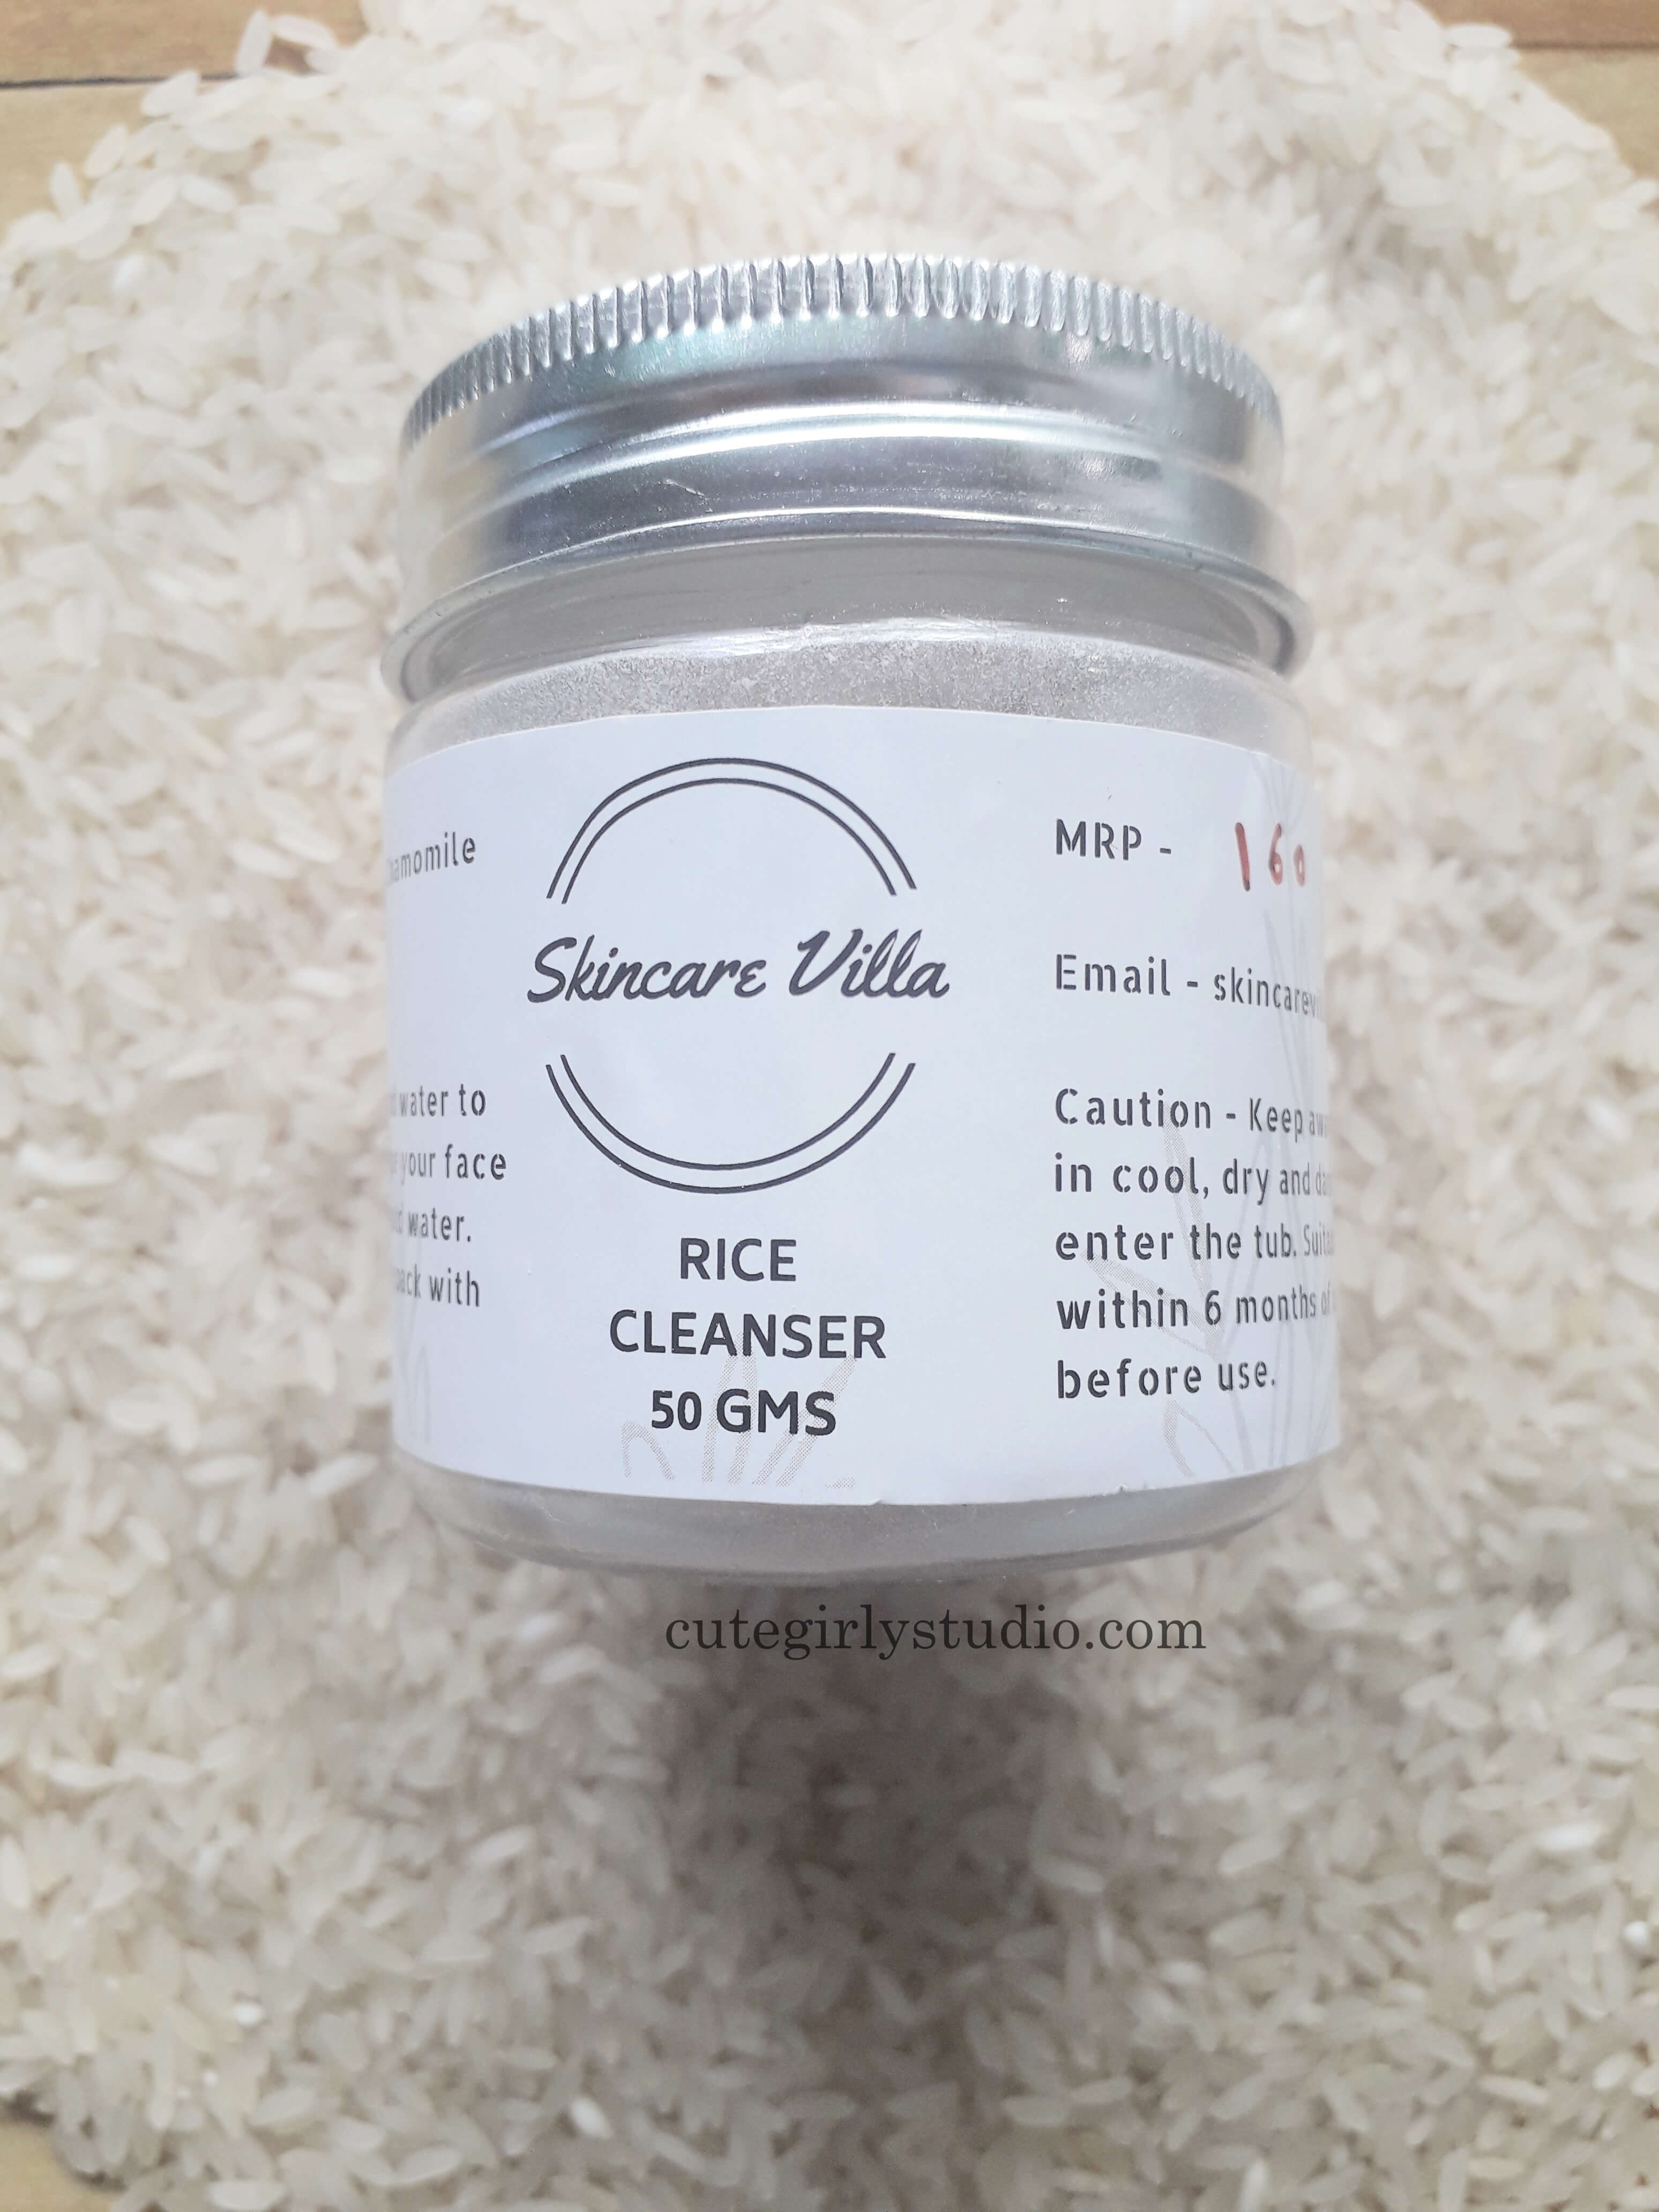 Skincare villa rice cleanser review